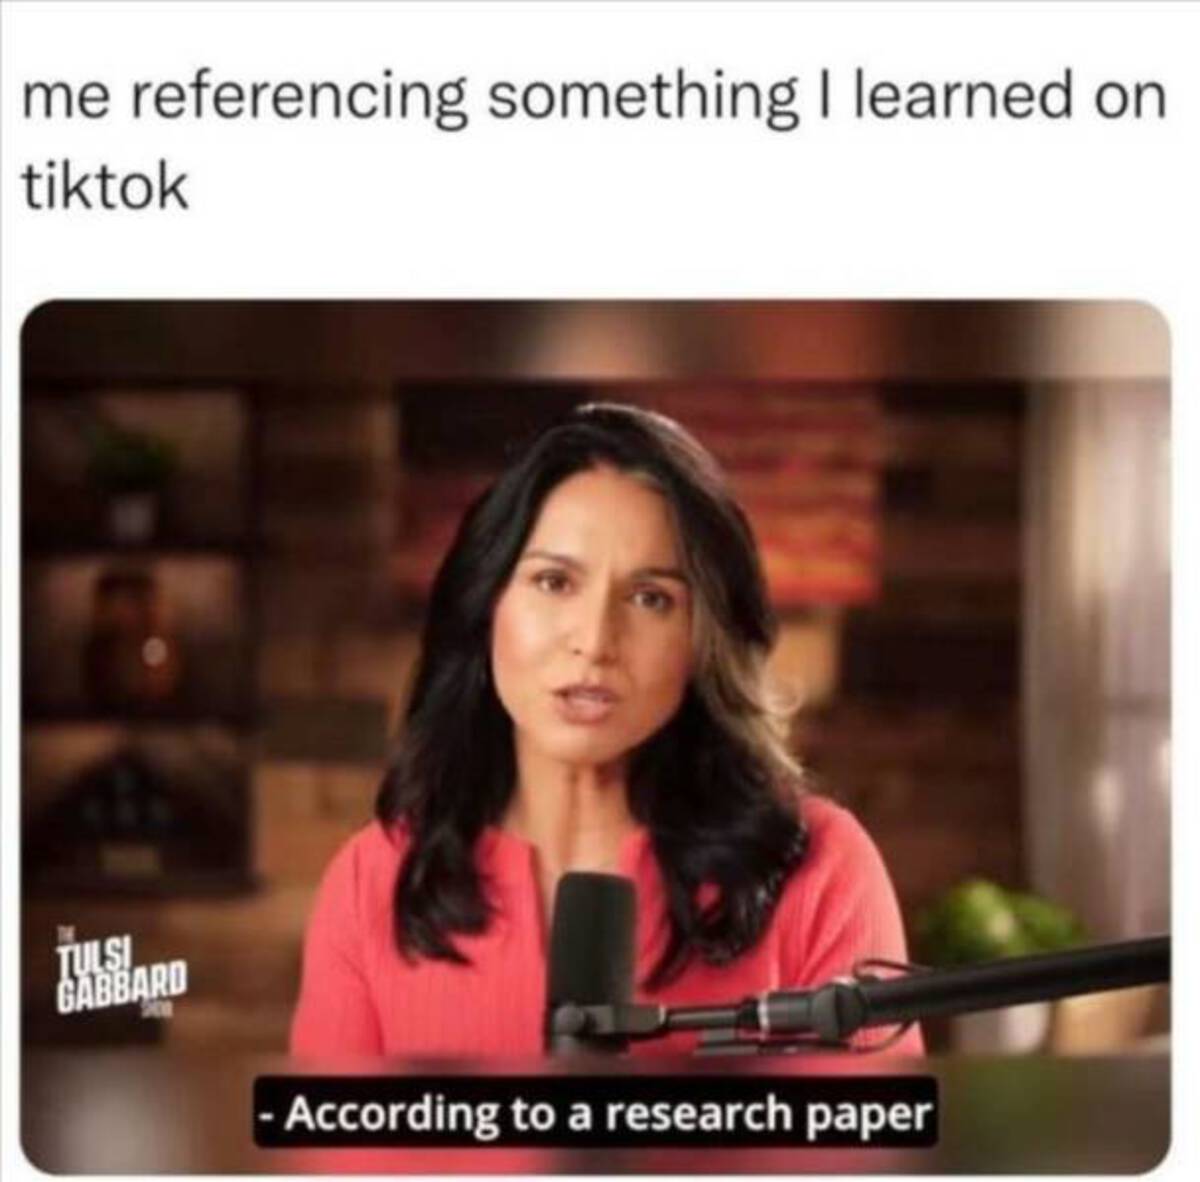 media - me referencing something I learned on tiktok Tulsi Gabbard According to a research paper